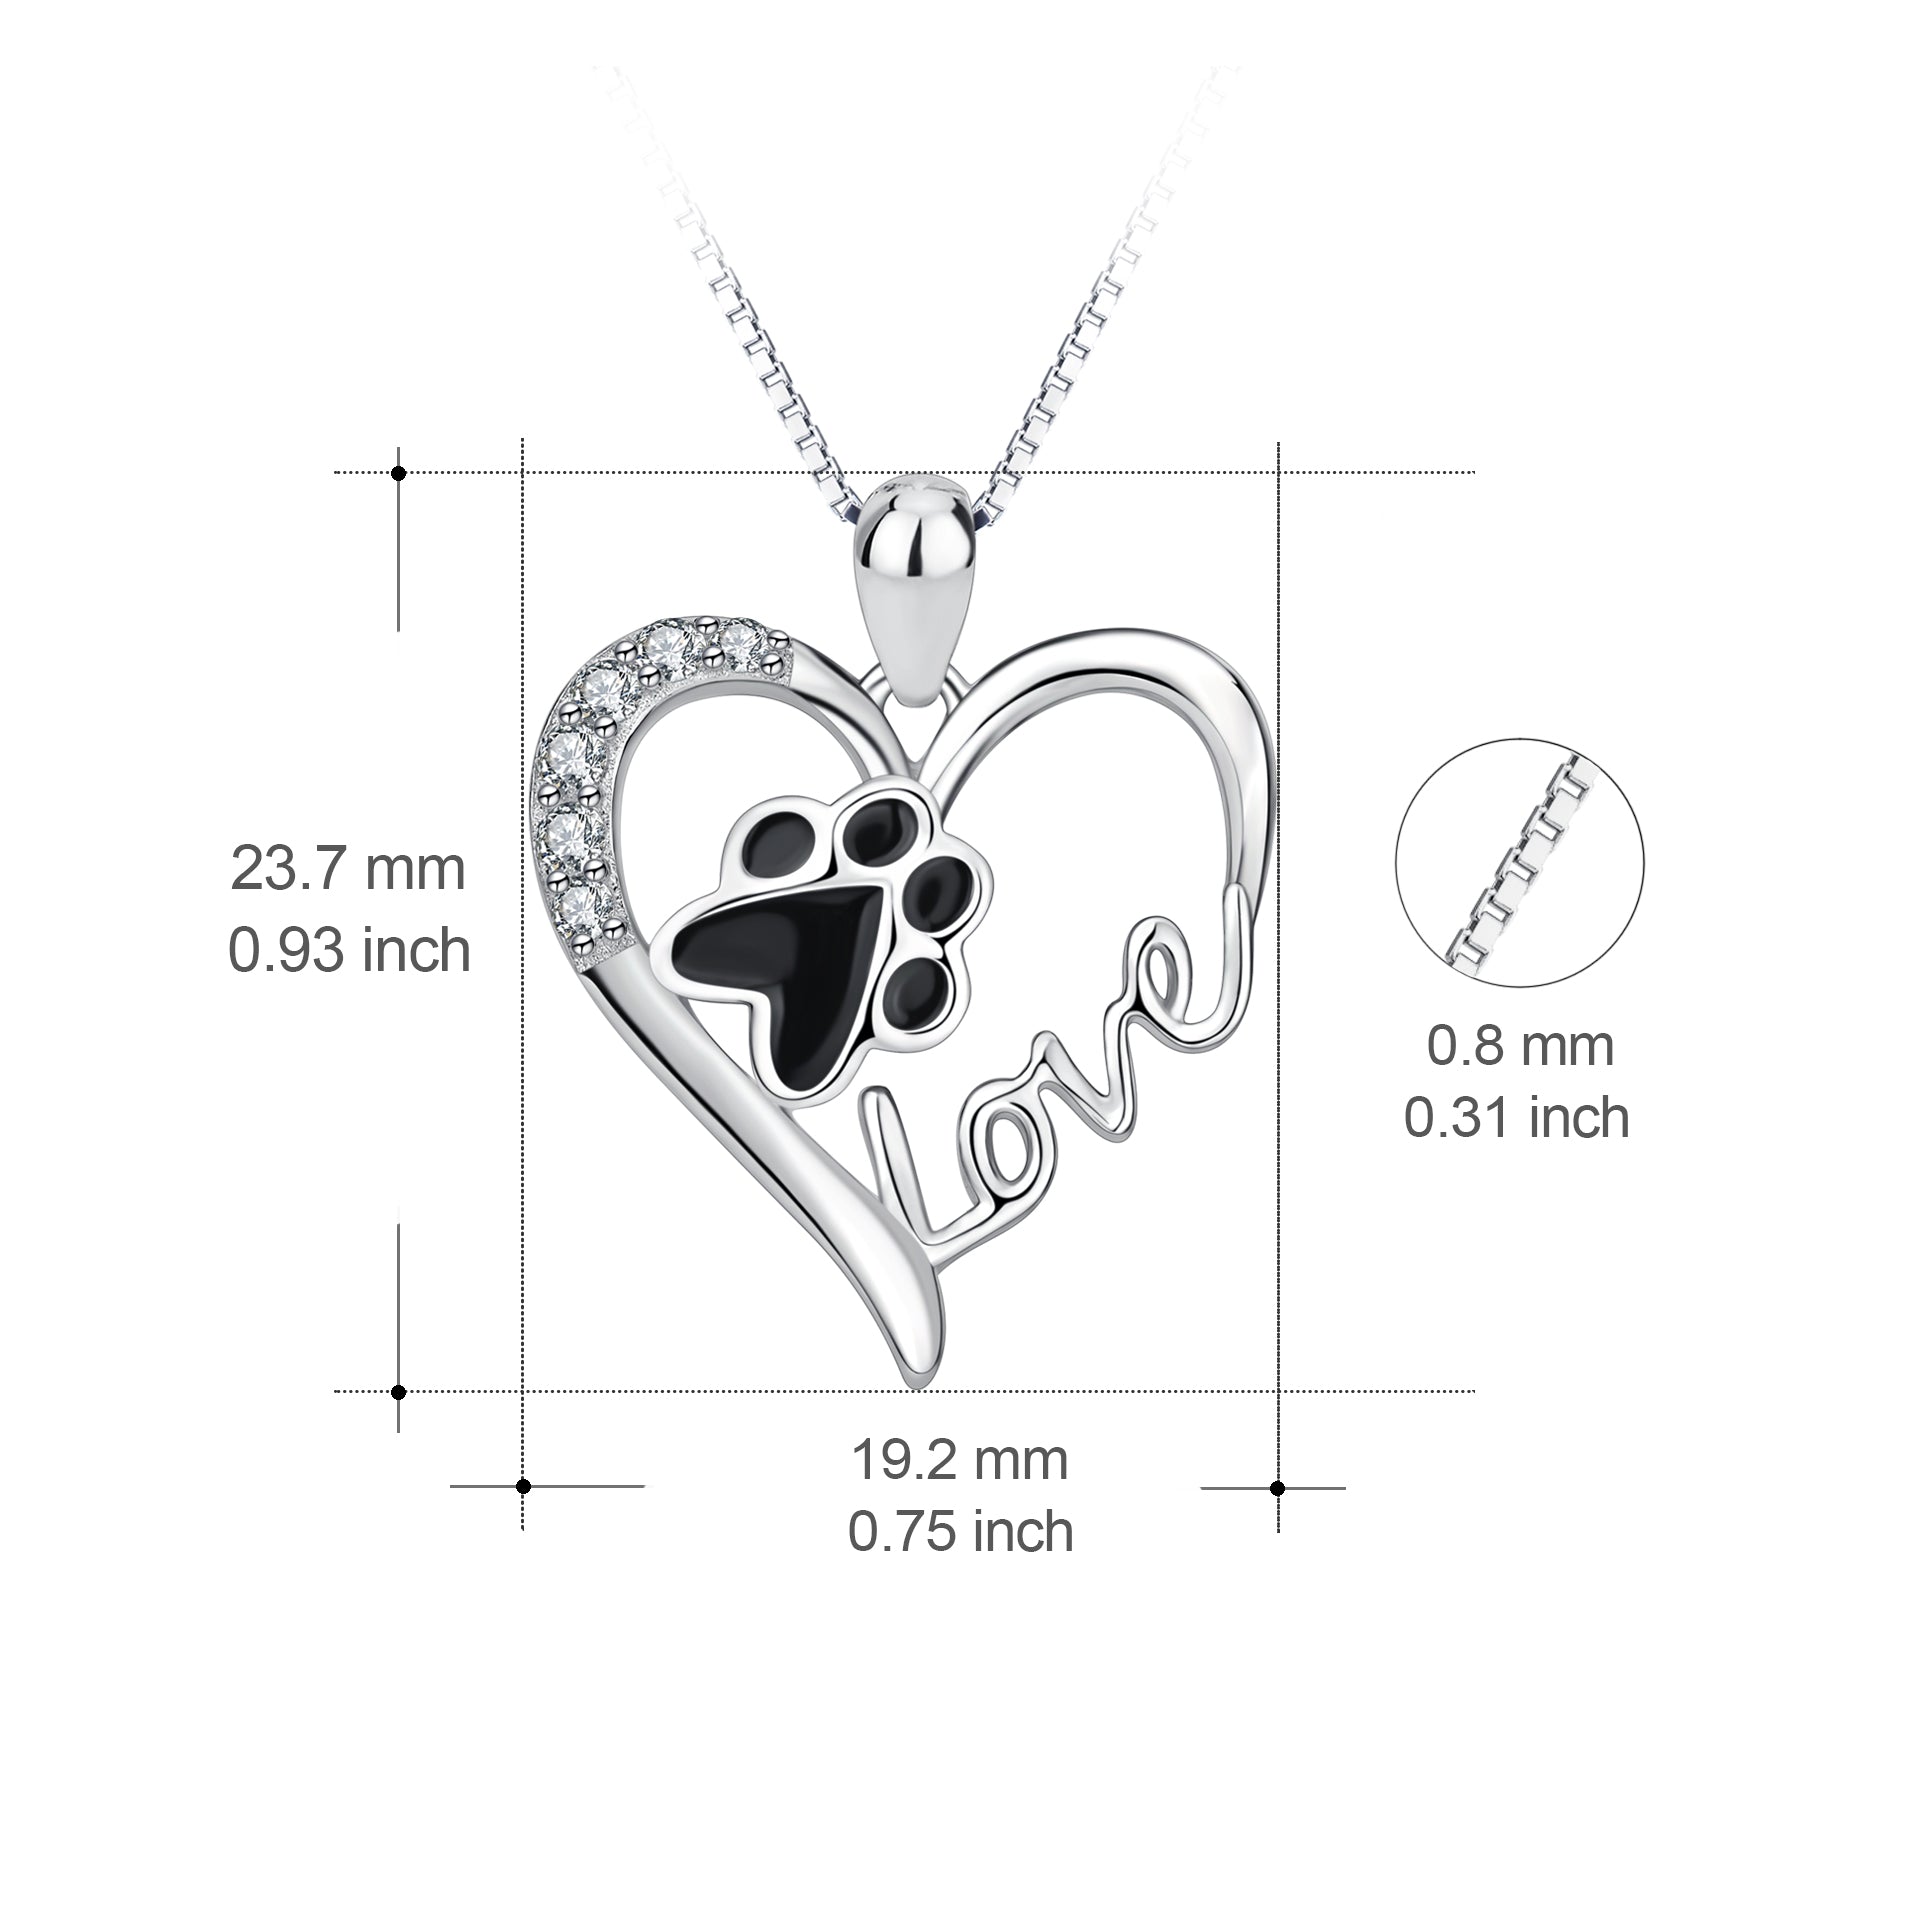 Animal Friend Necklace Black Dog Cat Claw Print Heart Shape Necklace